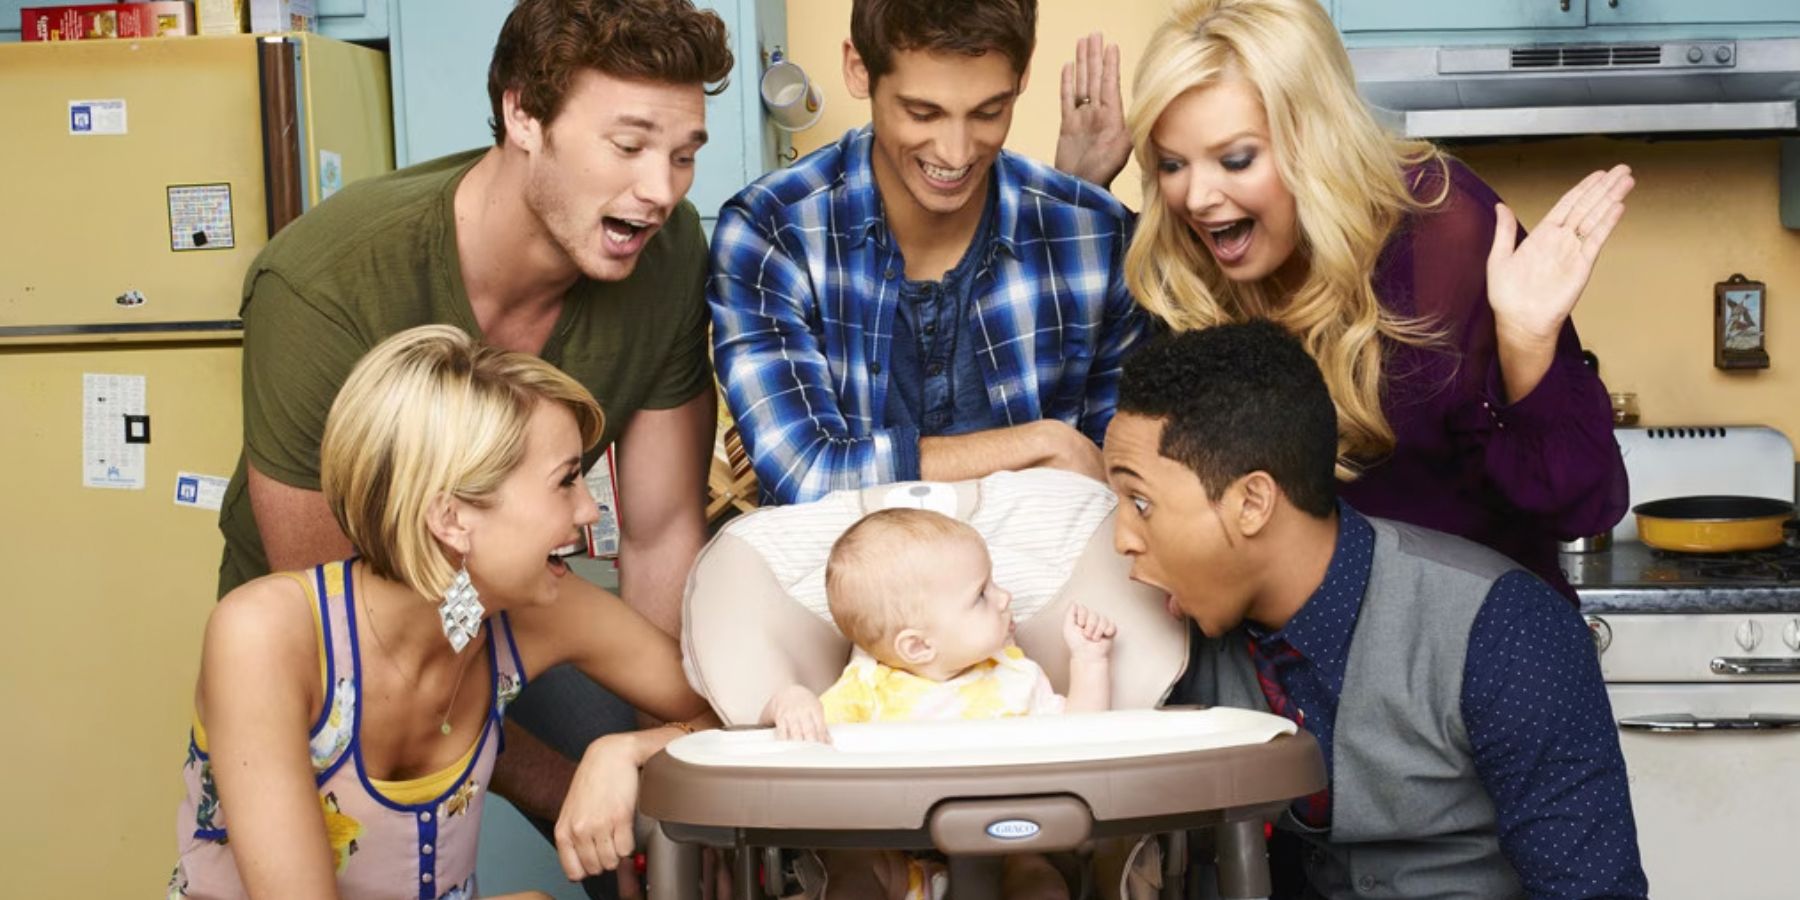 The Baby Daddy cast surrounding a high chair in a promotional image for the show